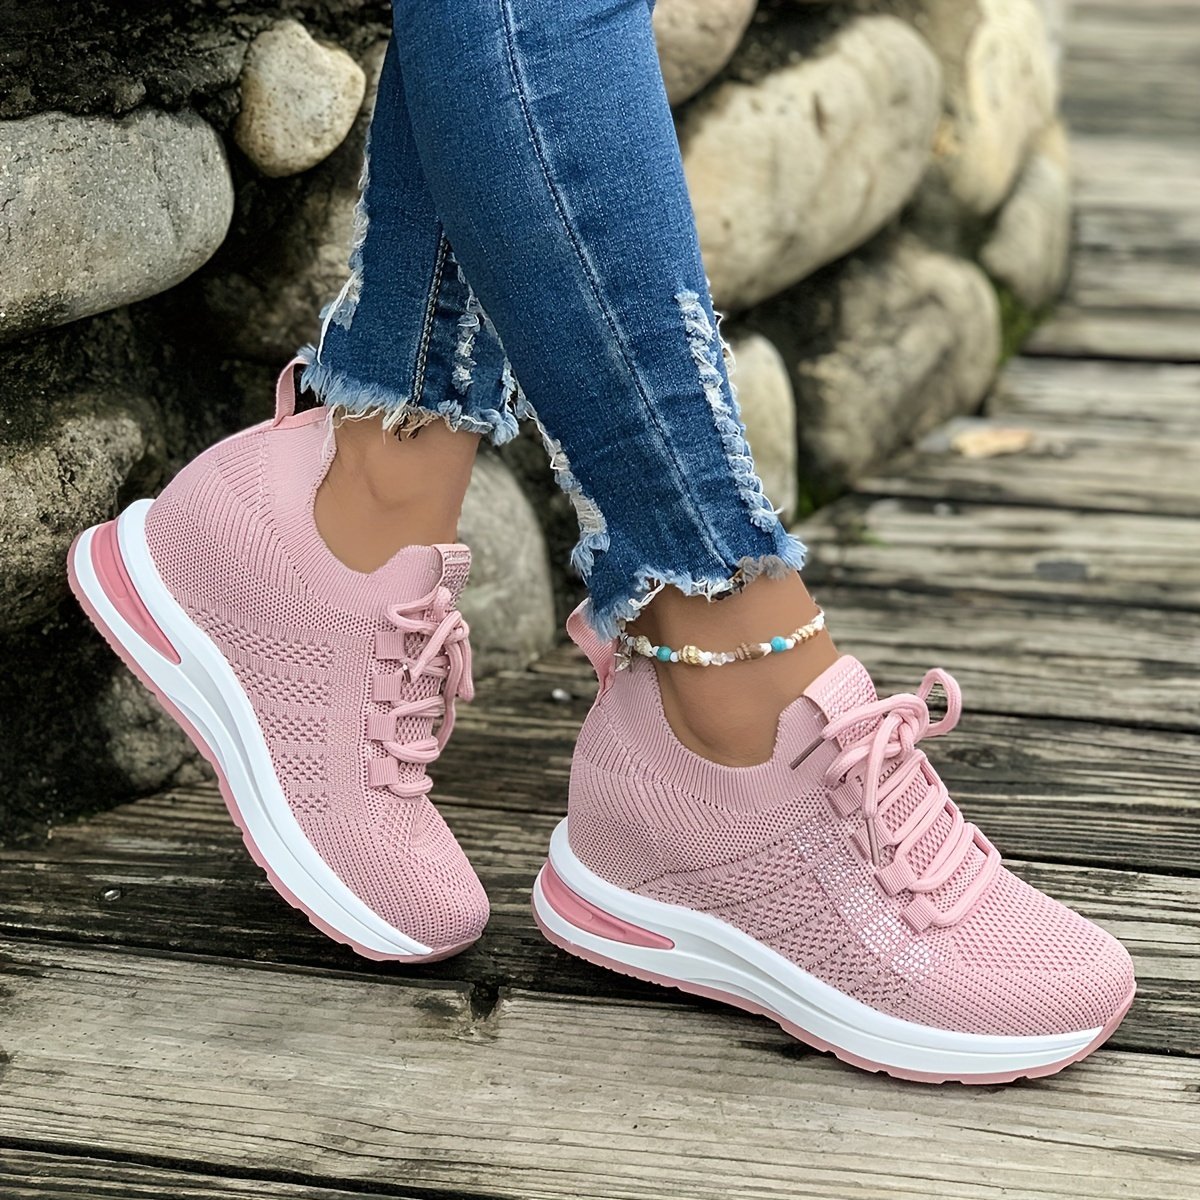 

Women's Flying Woven Mesh Sneakers, Lace Up Low-top Round Toe Heightening Breathable Shoes, Casual Outdoor Daily Shoes